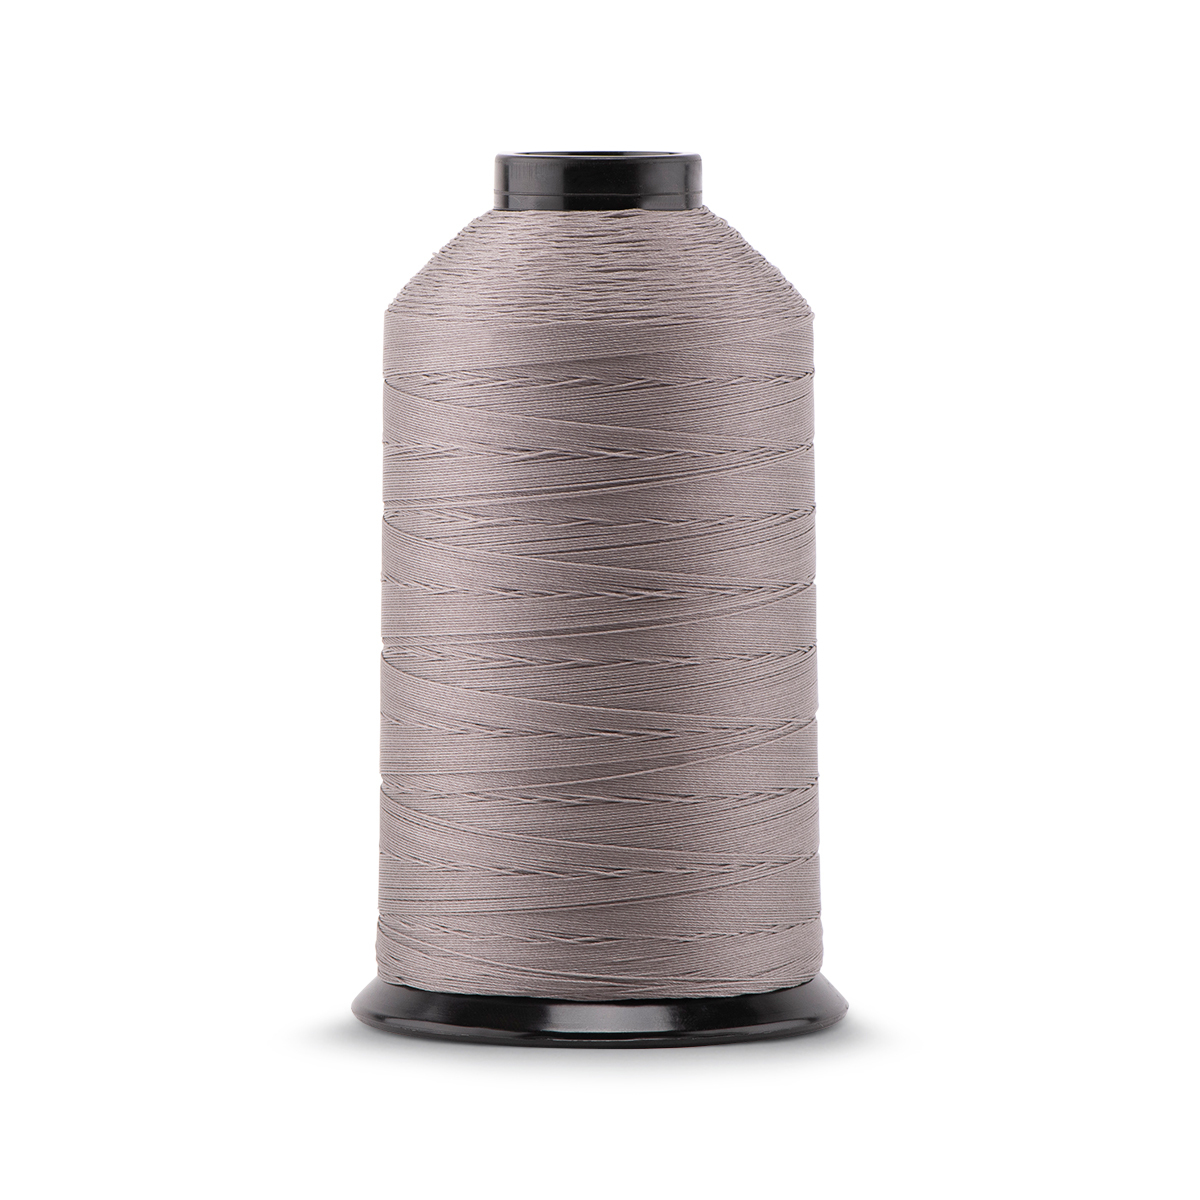 v46 Lightweight Nylon or Poly Alterations Leather Thread